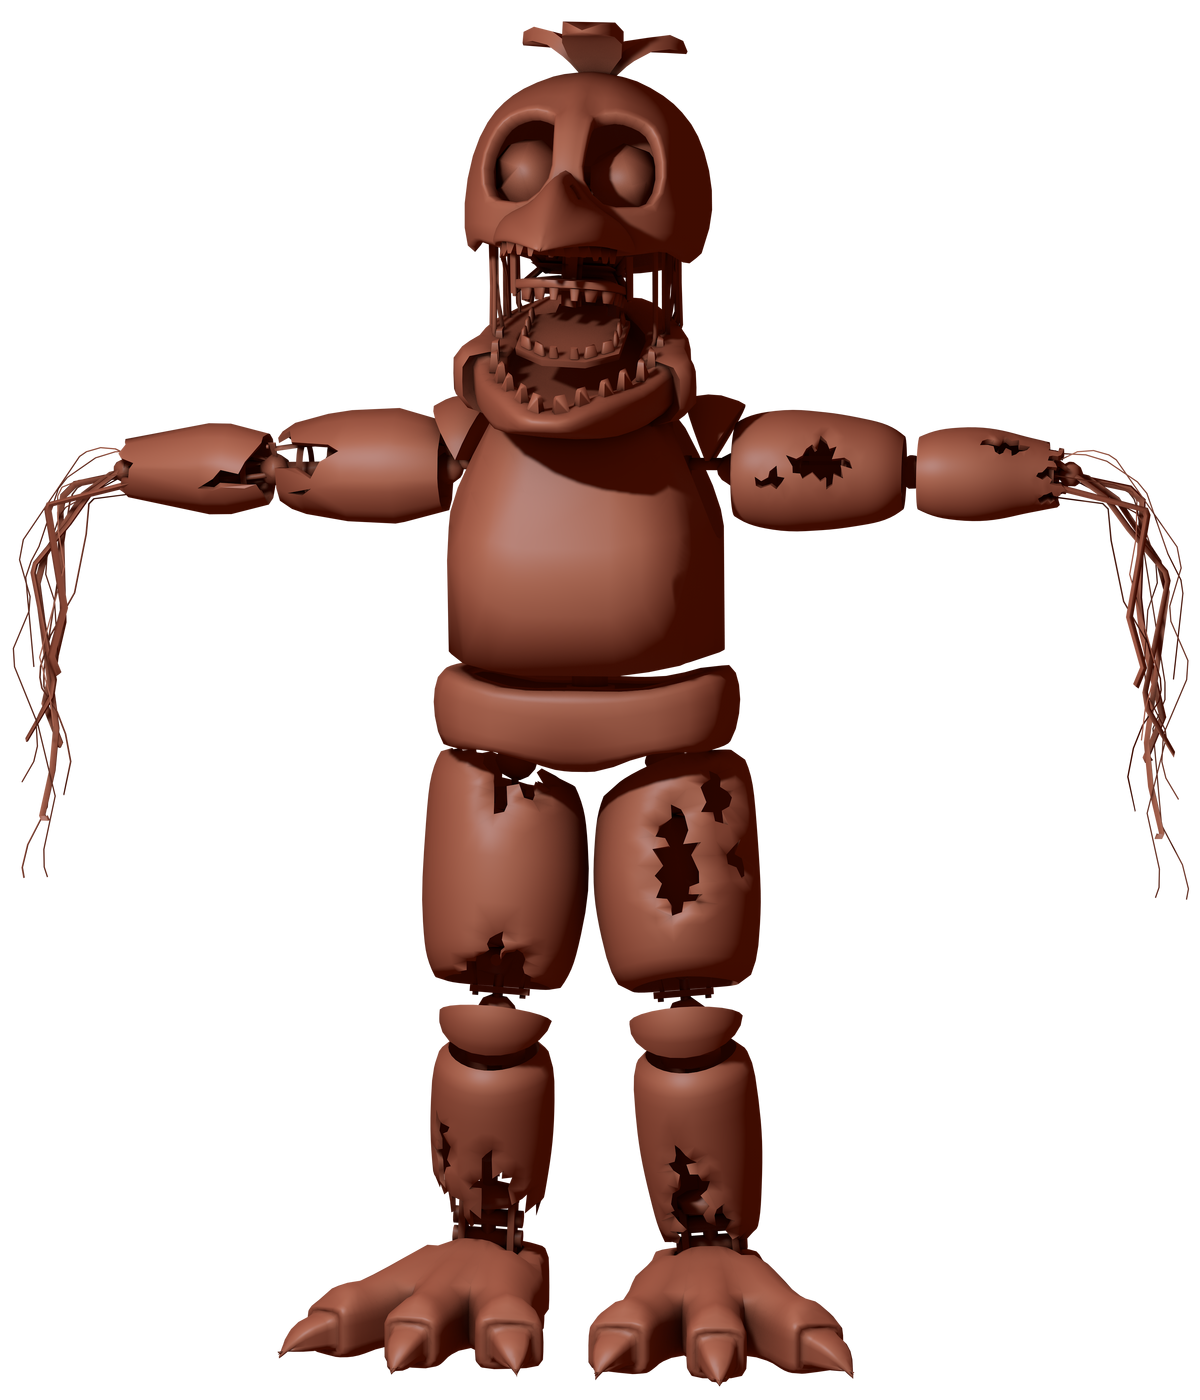 Fnaf files. Withered чика. Сломанная чика. Withered chica VR. Withered Animatronics.